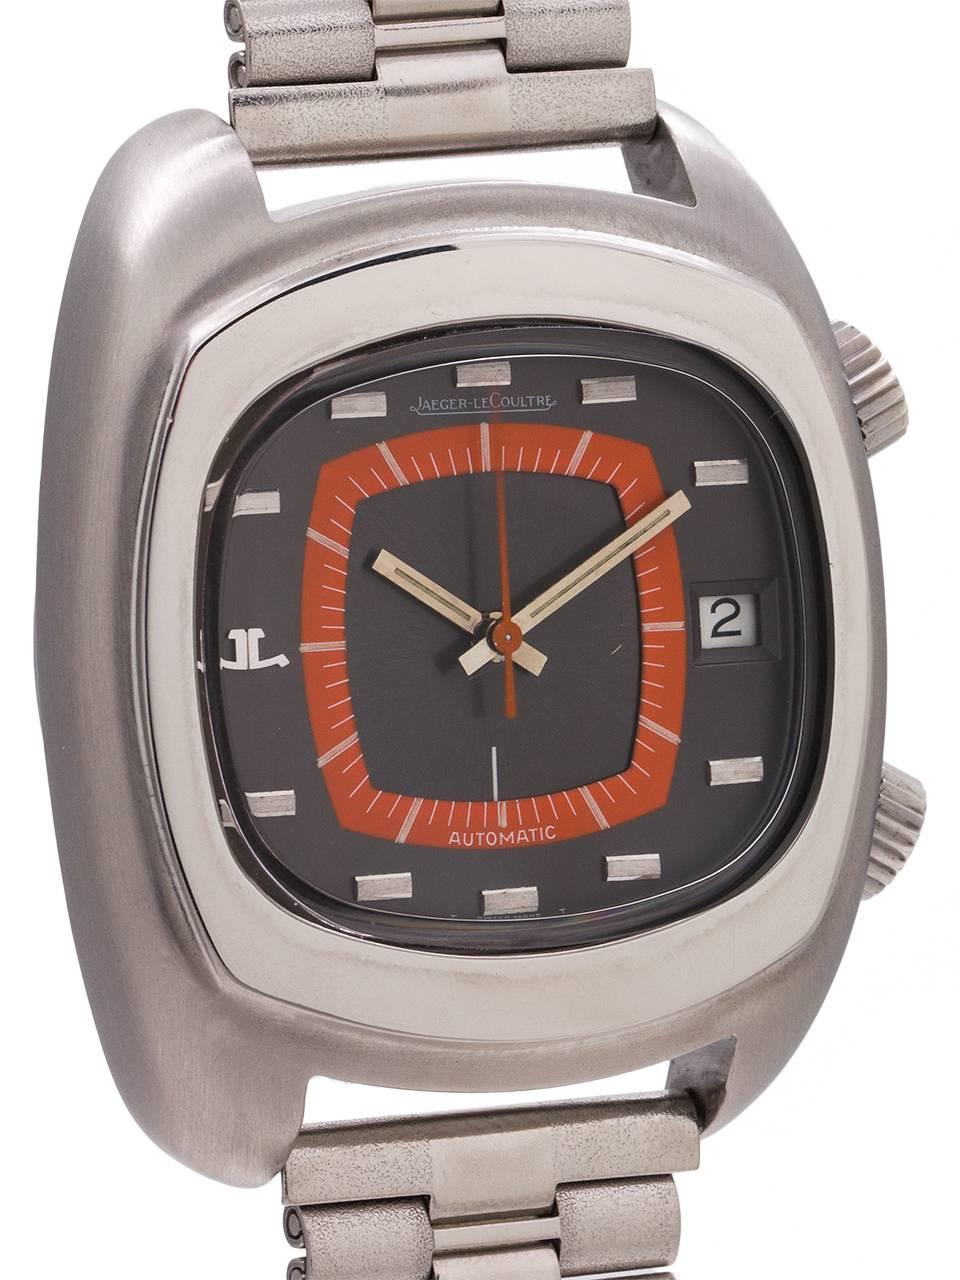 Modernist Jaeger LeCoultre Stainless Steel Memovox Alarm Self-Winding Wristwatch, c1970s